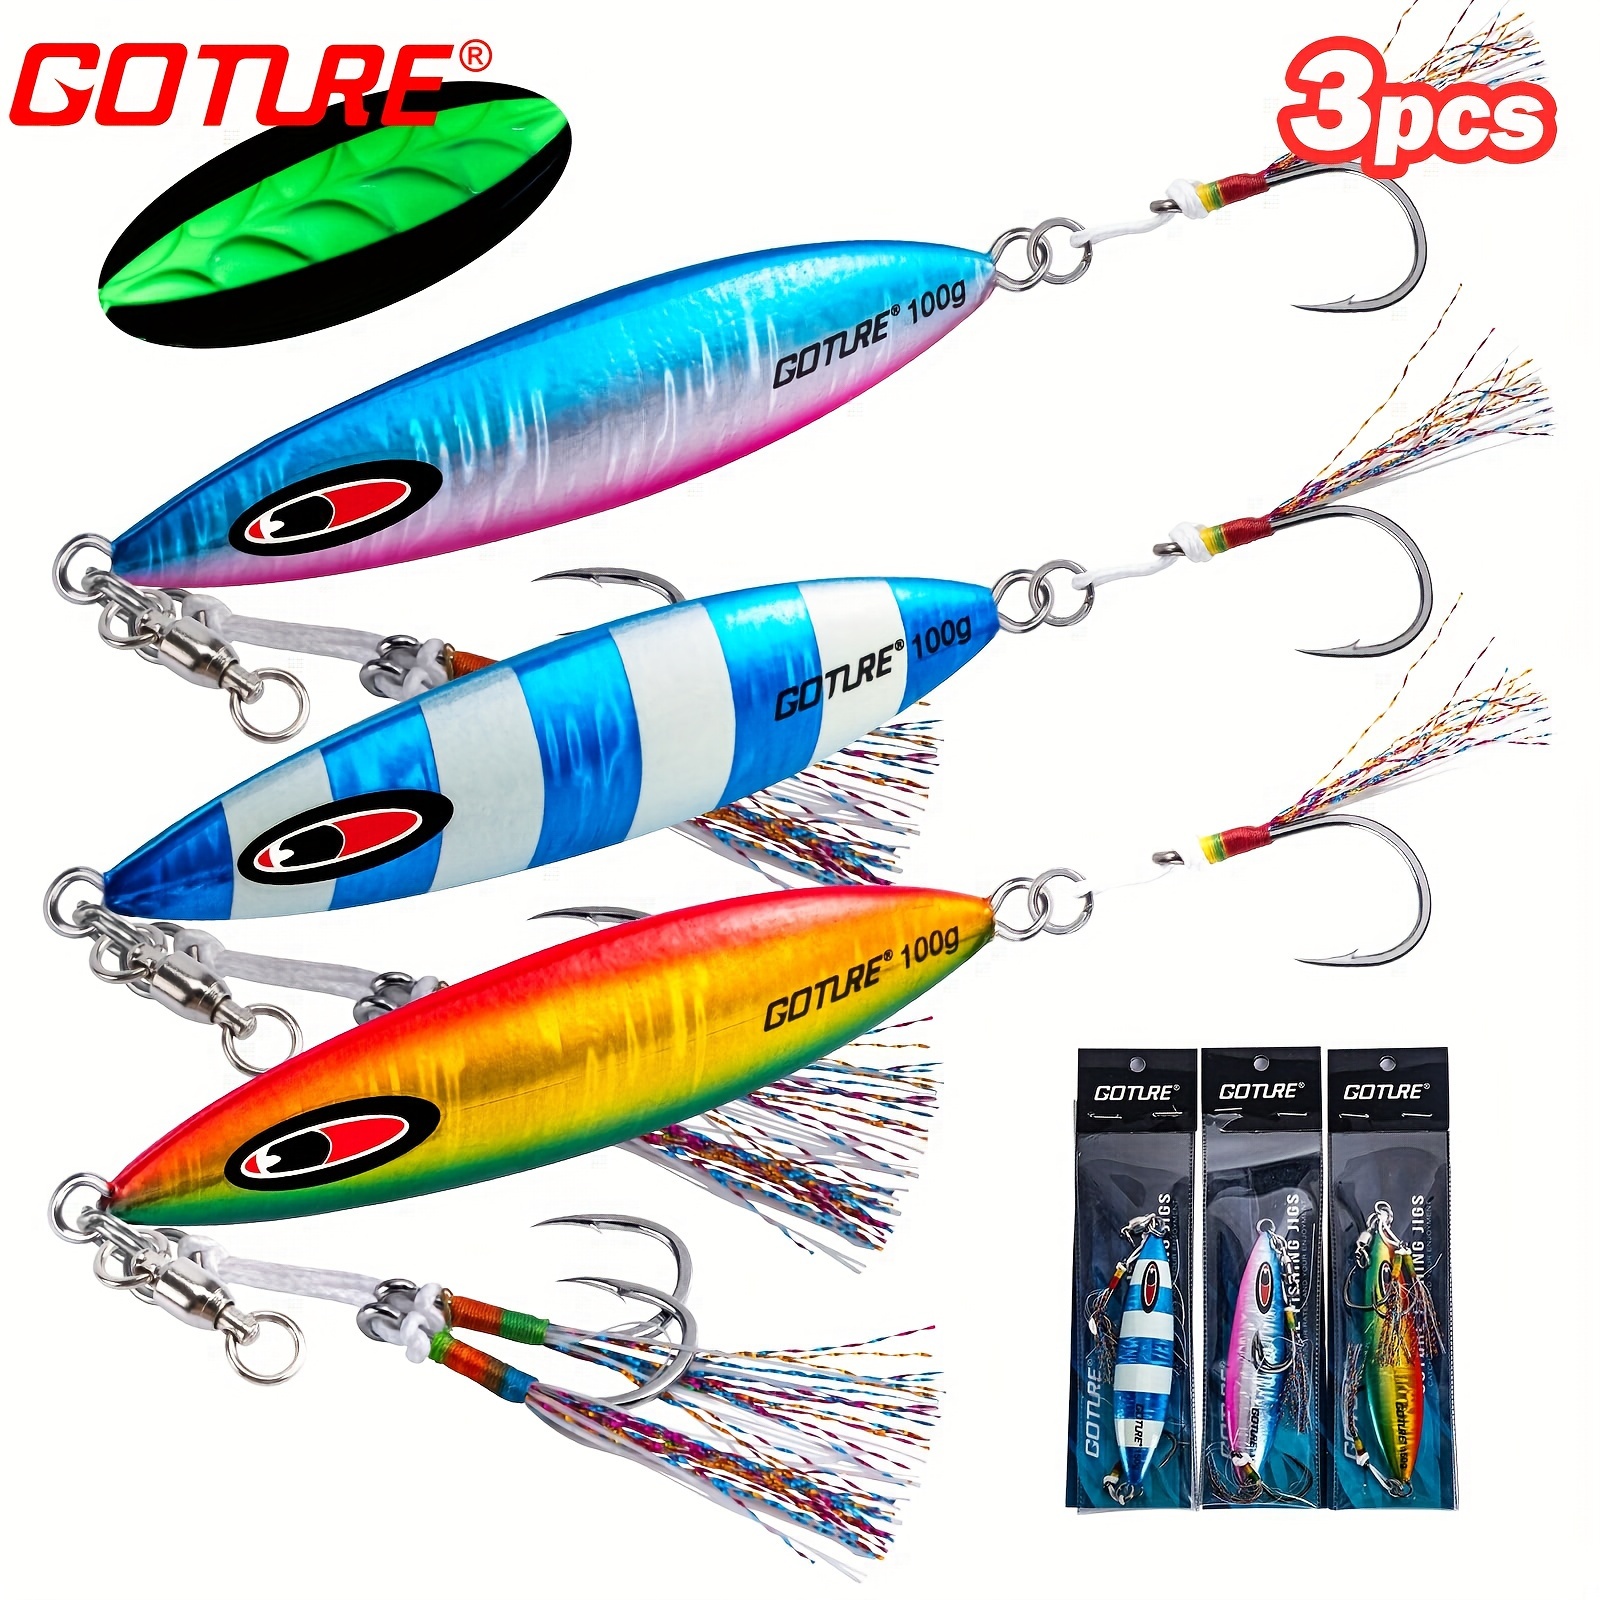 HANDING 7g/10g/15g Fishing Jigs Saltwater Fishing Lures with Assist Hooks,  Slow Pitch Jigs,Fishing Lures Saltwater Jigs Spoon Lures